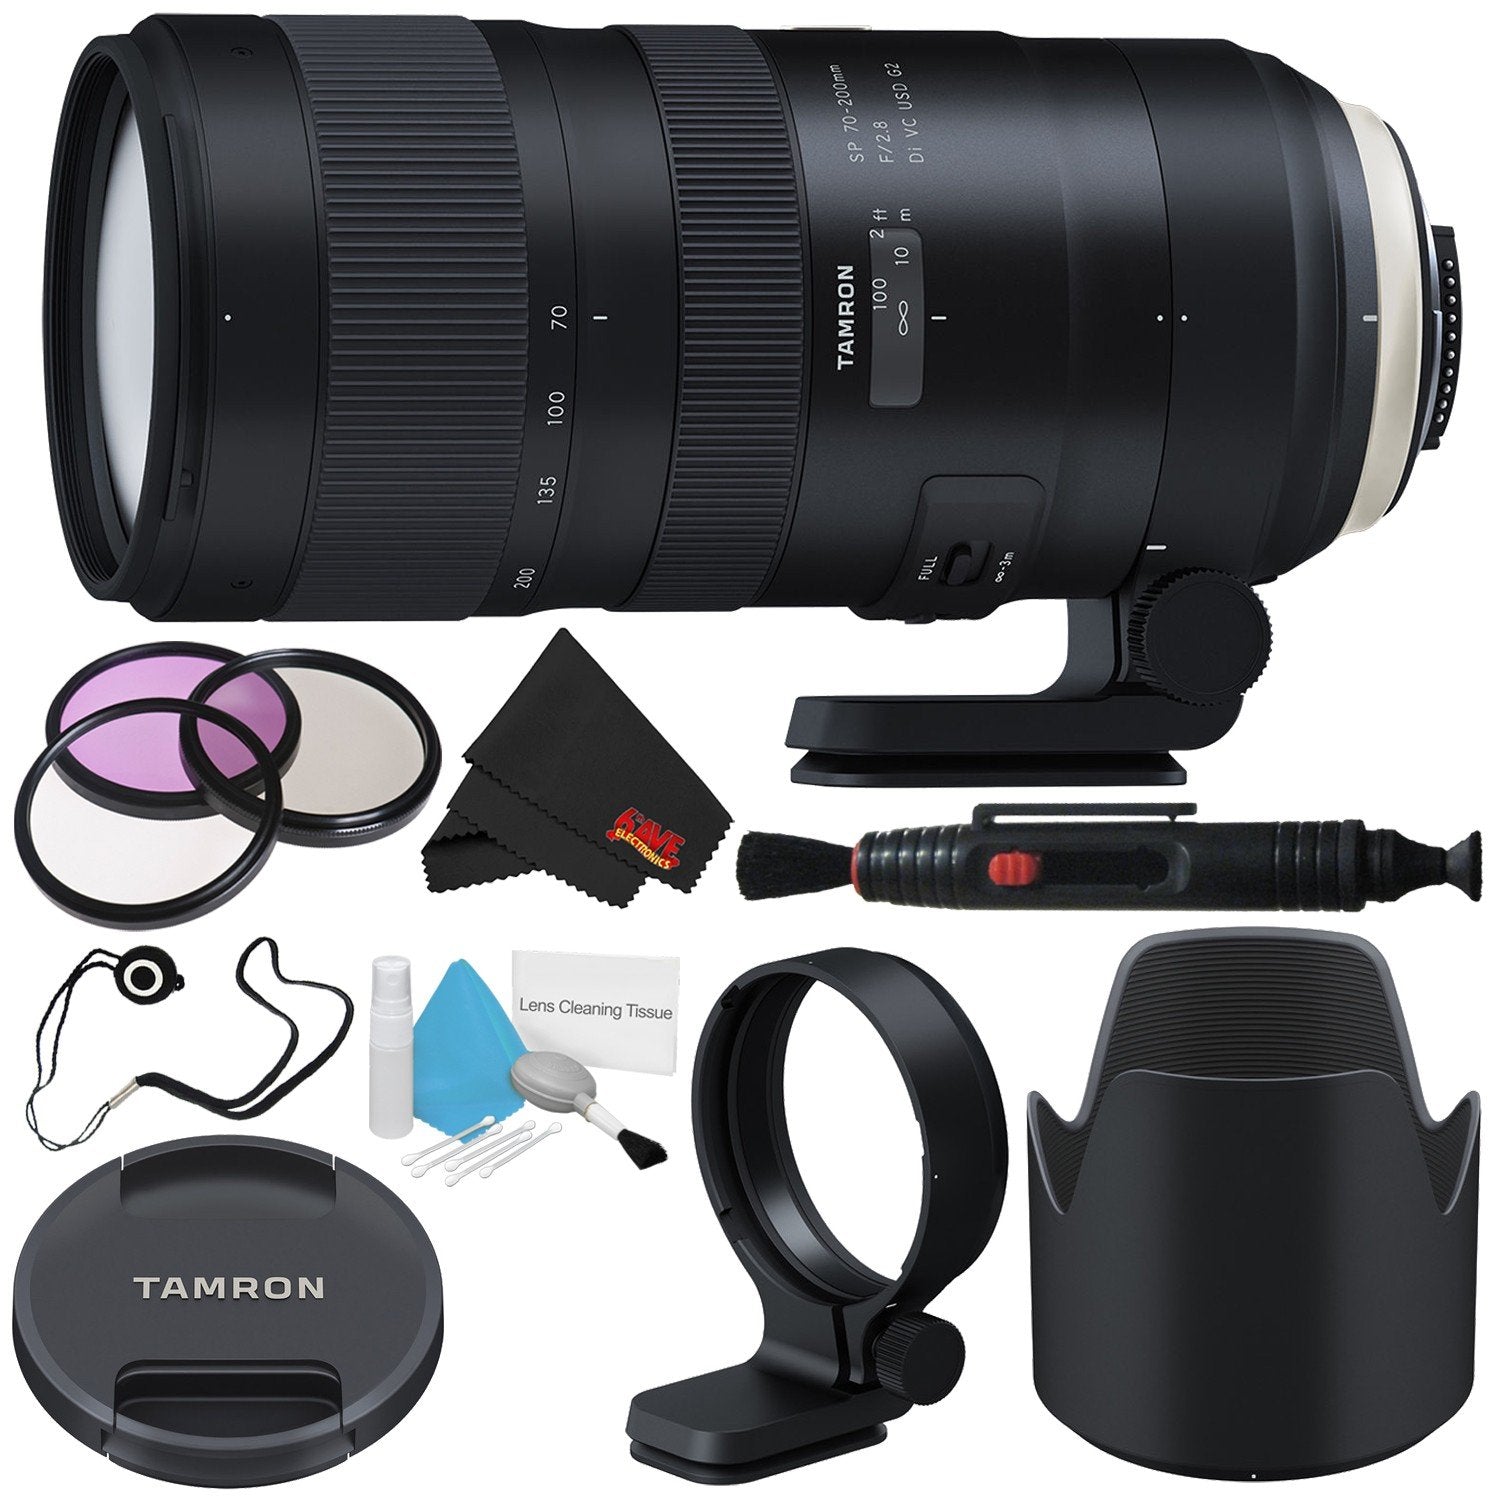 6Ave Tamron SP 70-200mm f/2.8 Di VC USD G2 Lens for Nikon F (International Model) + 77mm 3 Piece Filter Kit + Deluxe Cle